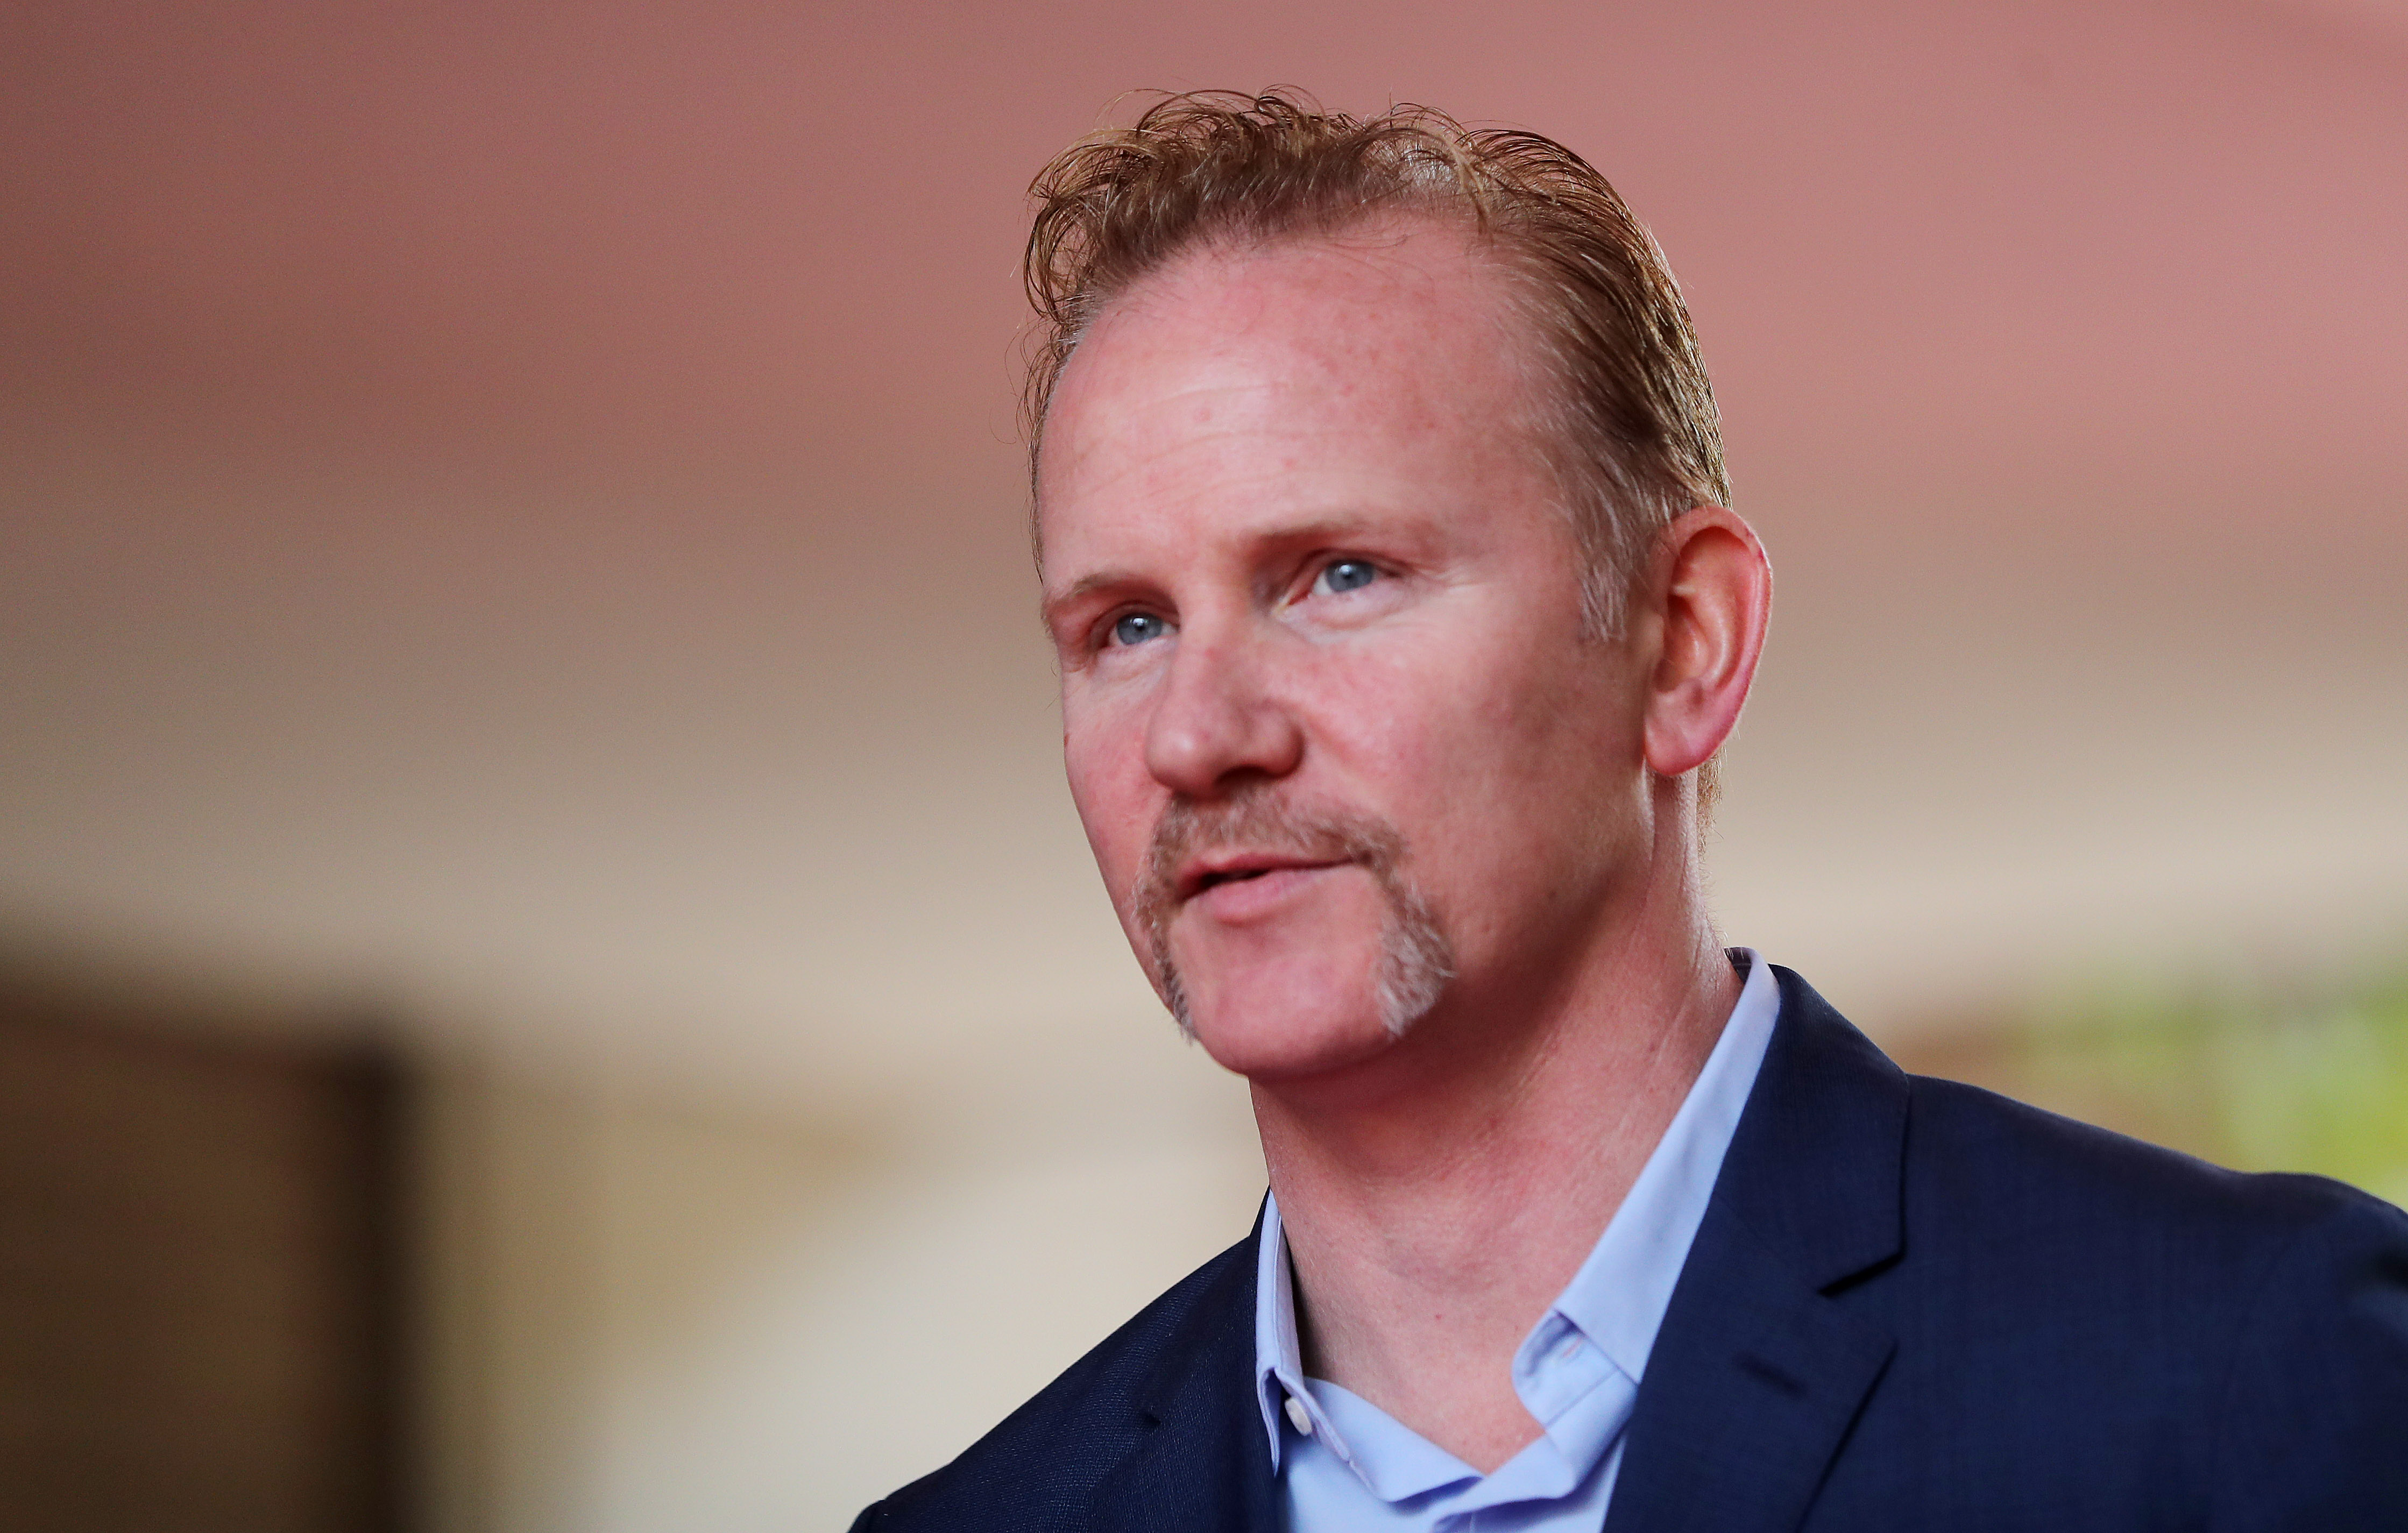 Morgan Spurlock at the red carpet for the movie, "TiFF Super Size Me 2 " at the Ryerson Theatre  in Toronto.  Sept.8, 2017. (Steve Russell—Toronto Star/Getty Images)